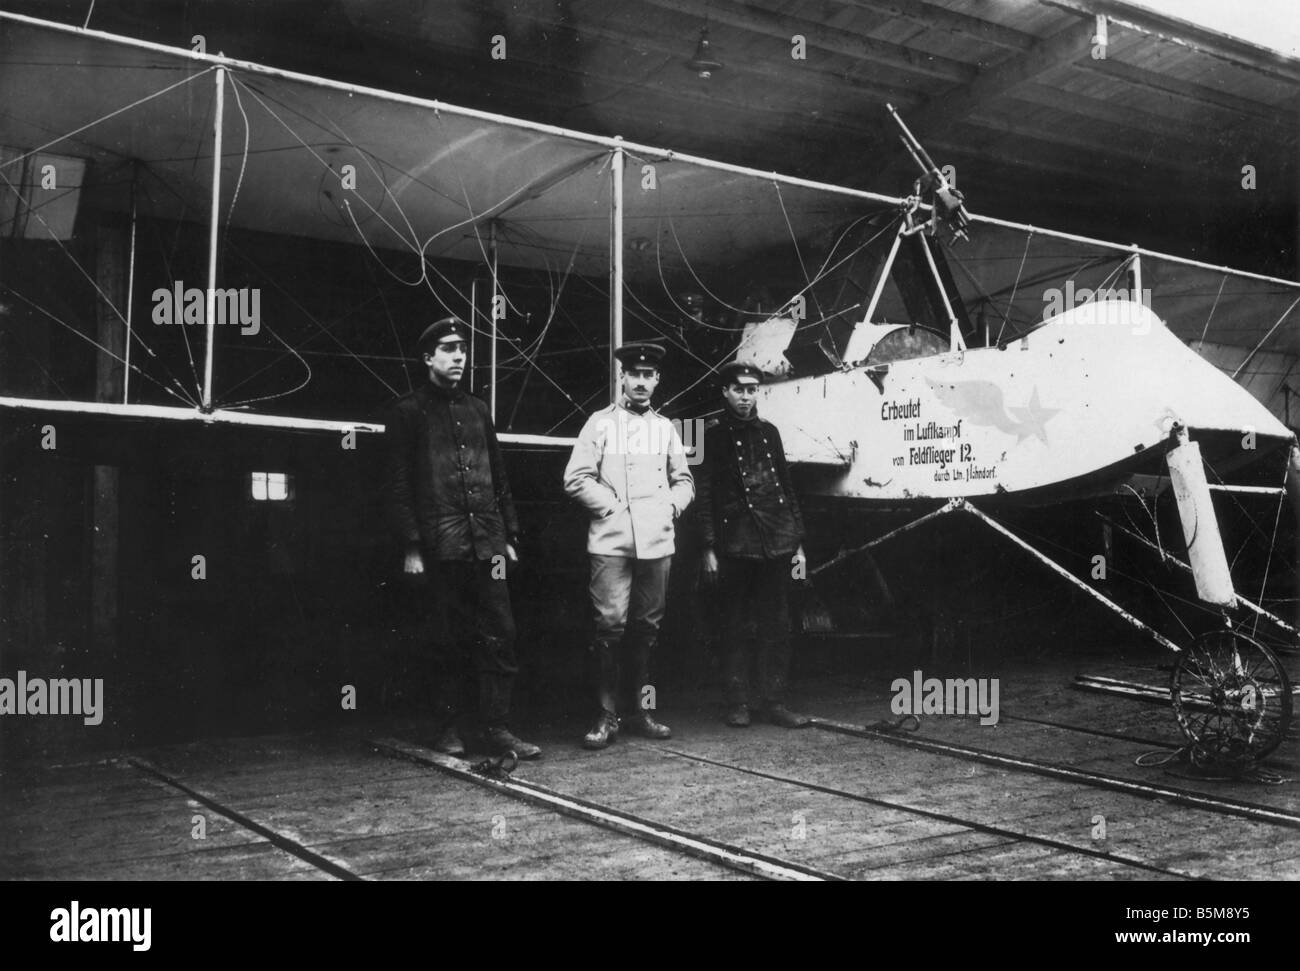 2 G55 L2 1917 7 French Voisin warplane WWI 1917 History World War I Aerial warfare Members of the German air defence forces with Stock Photo